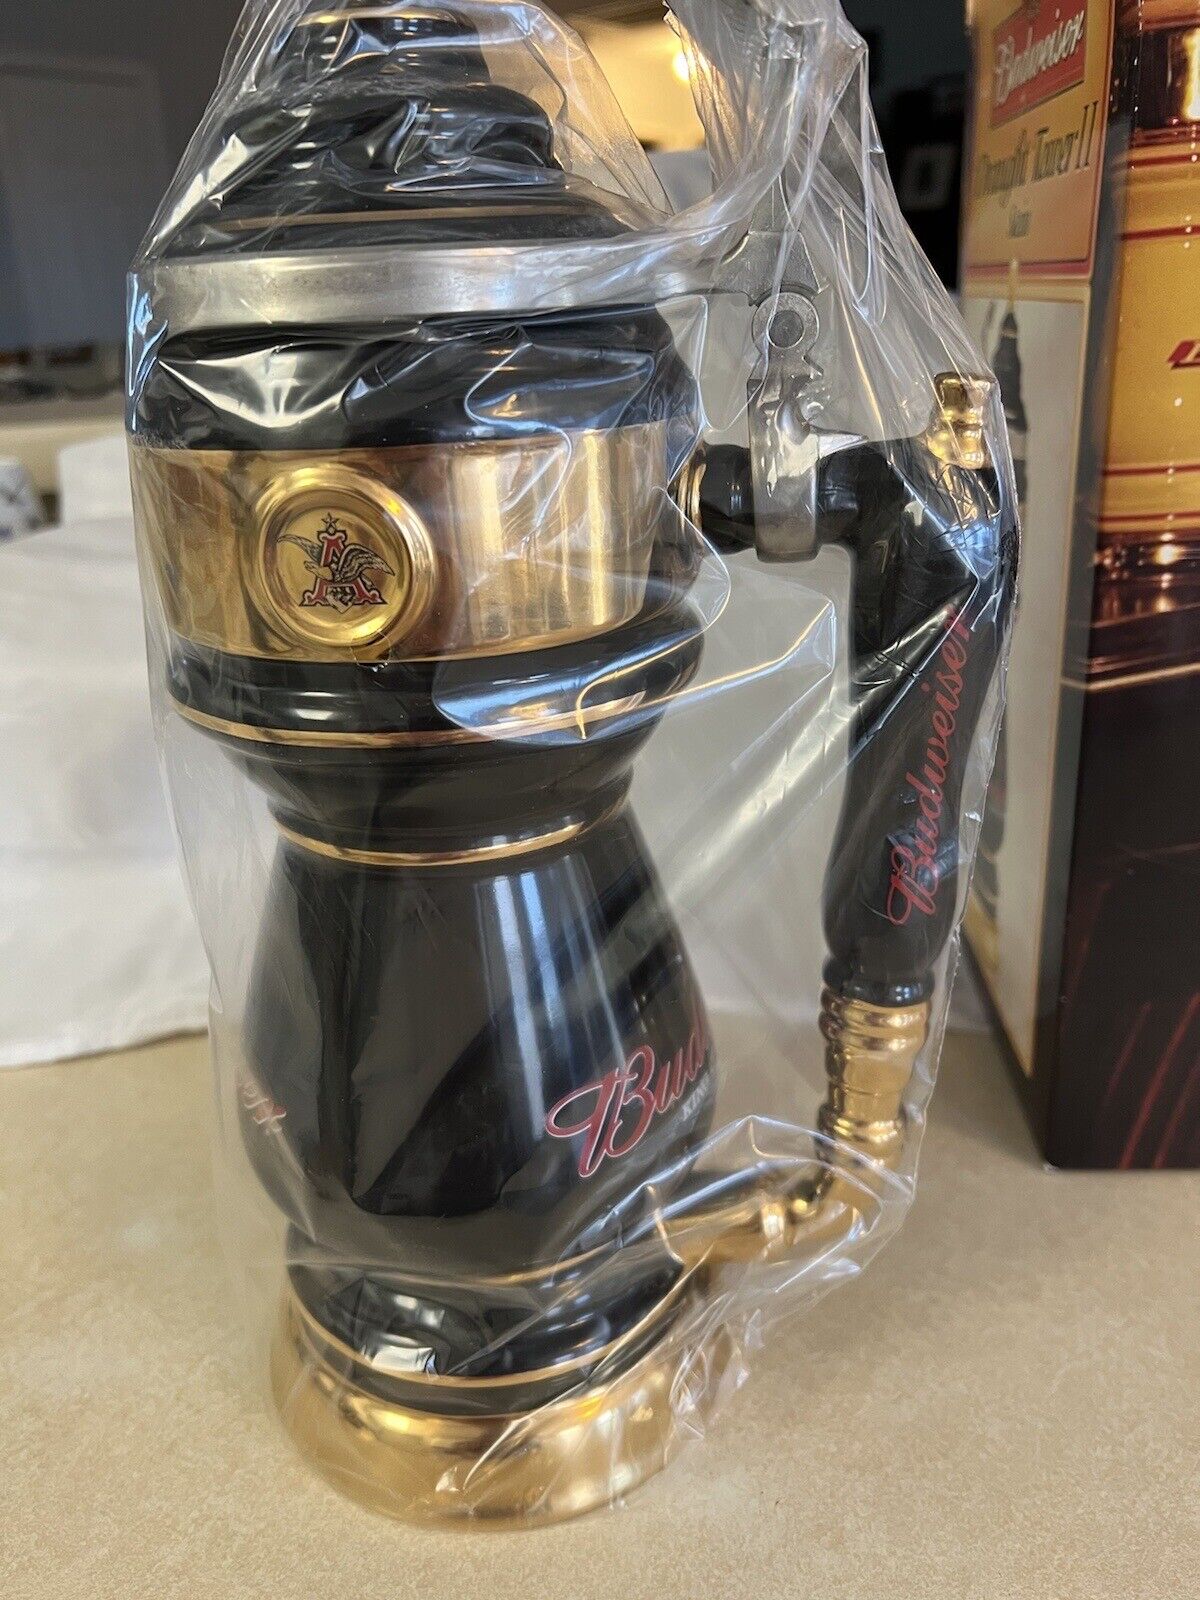 Franklin Mint Budweiser Blk(Drought Tower || ) Limited Edition Ceramic Stein